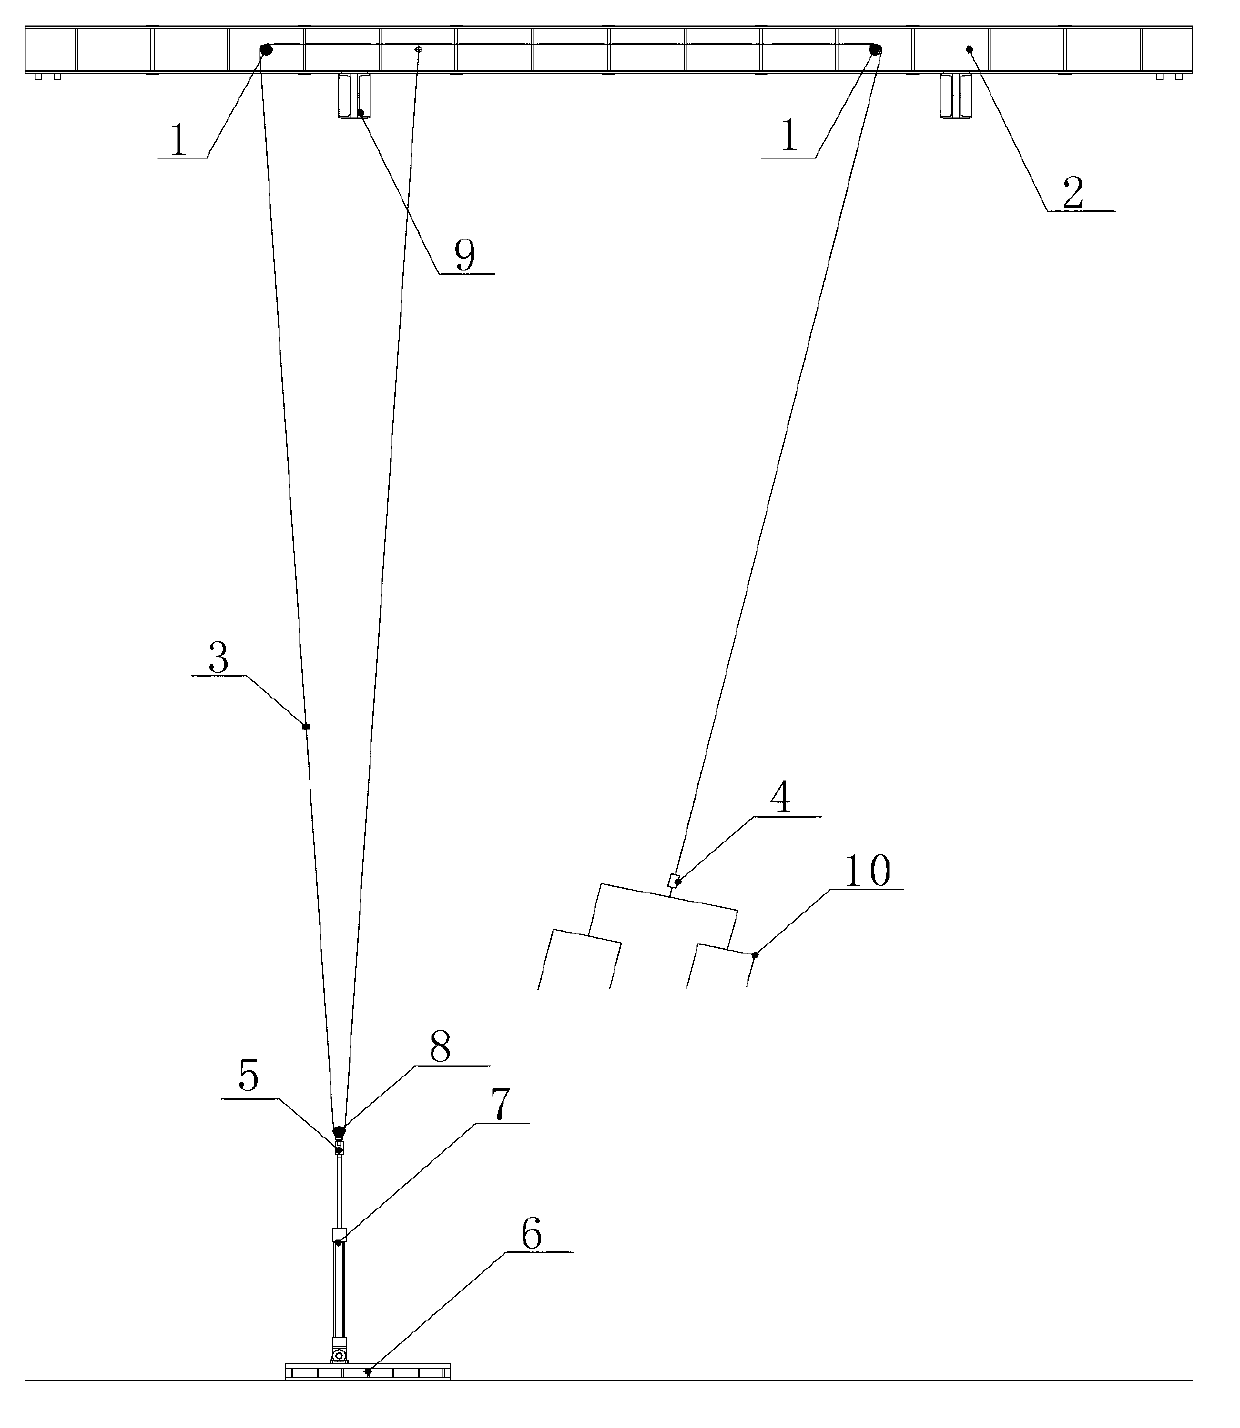 Loading system and method for airplane structure test